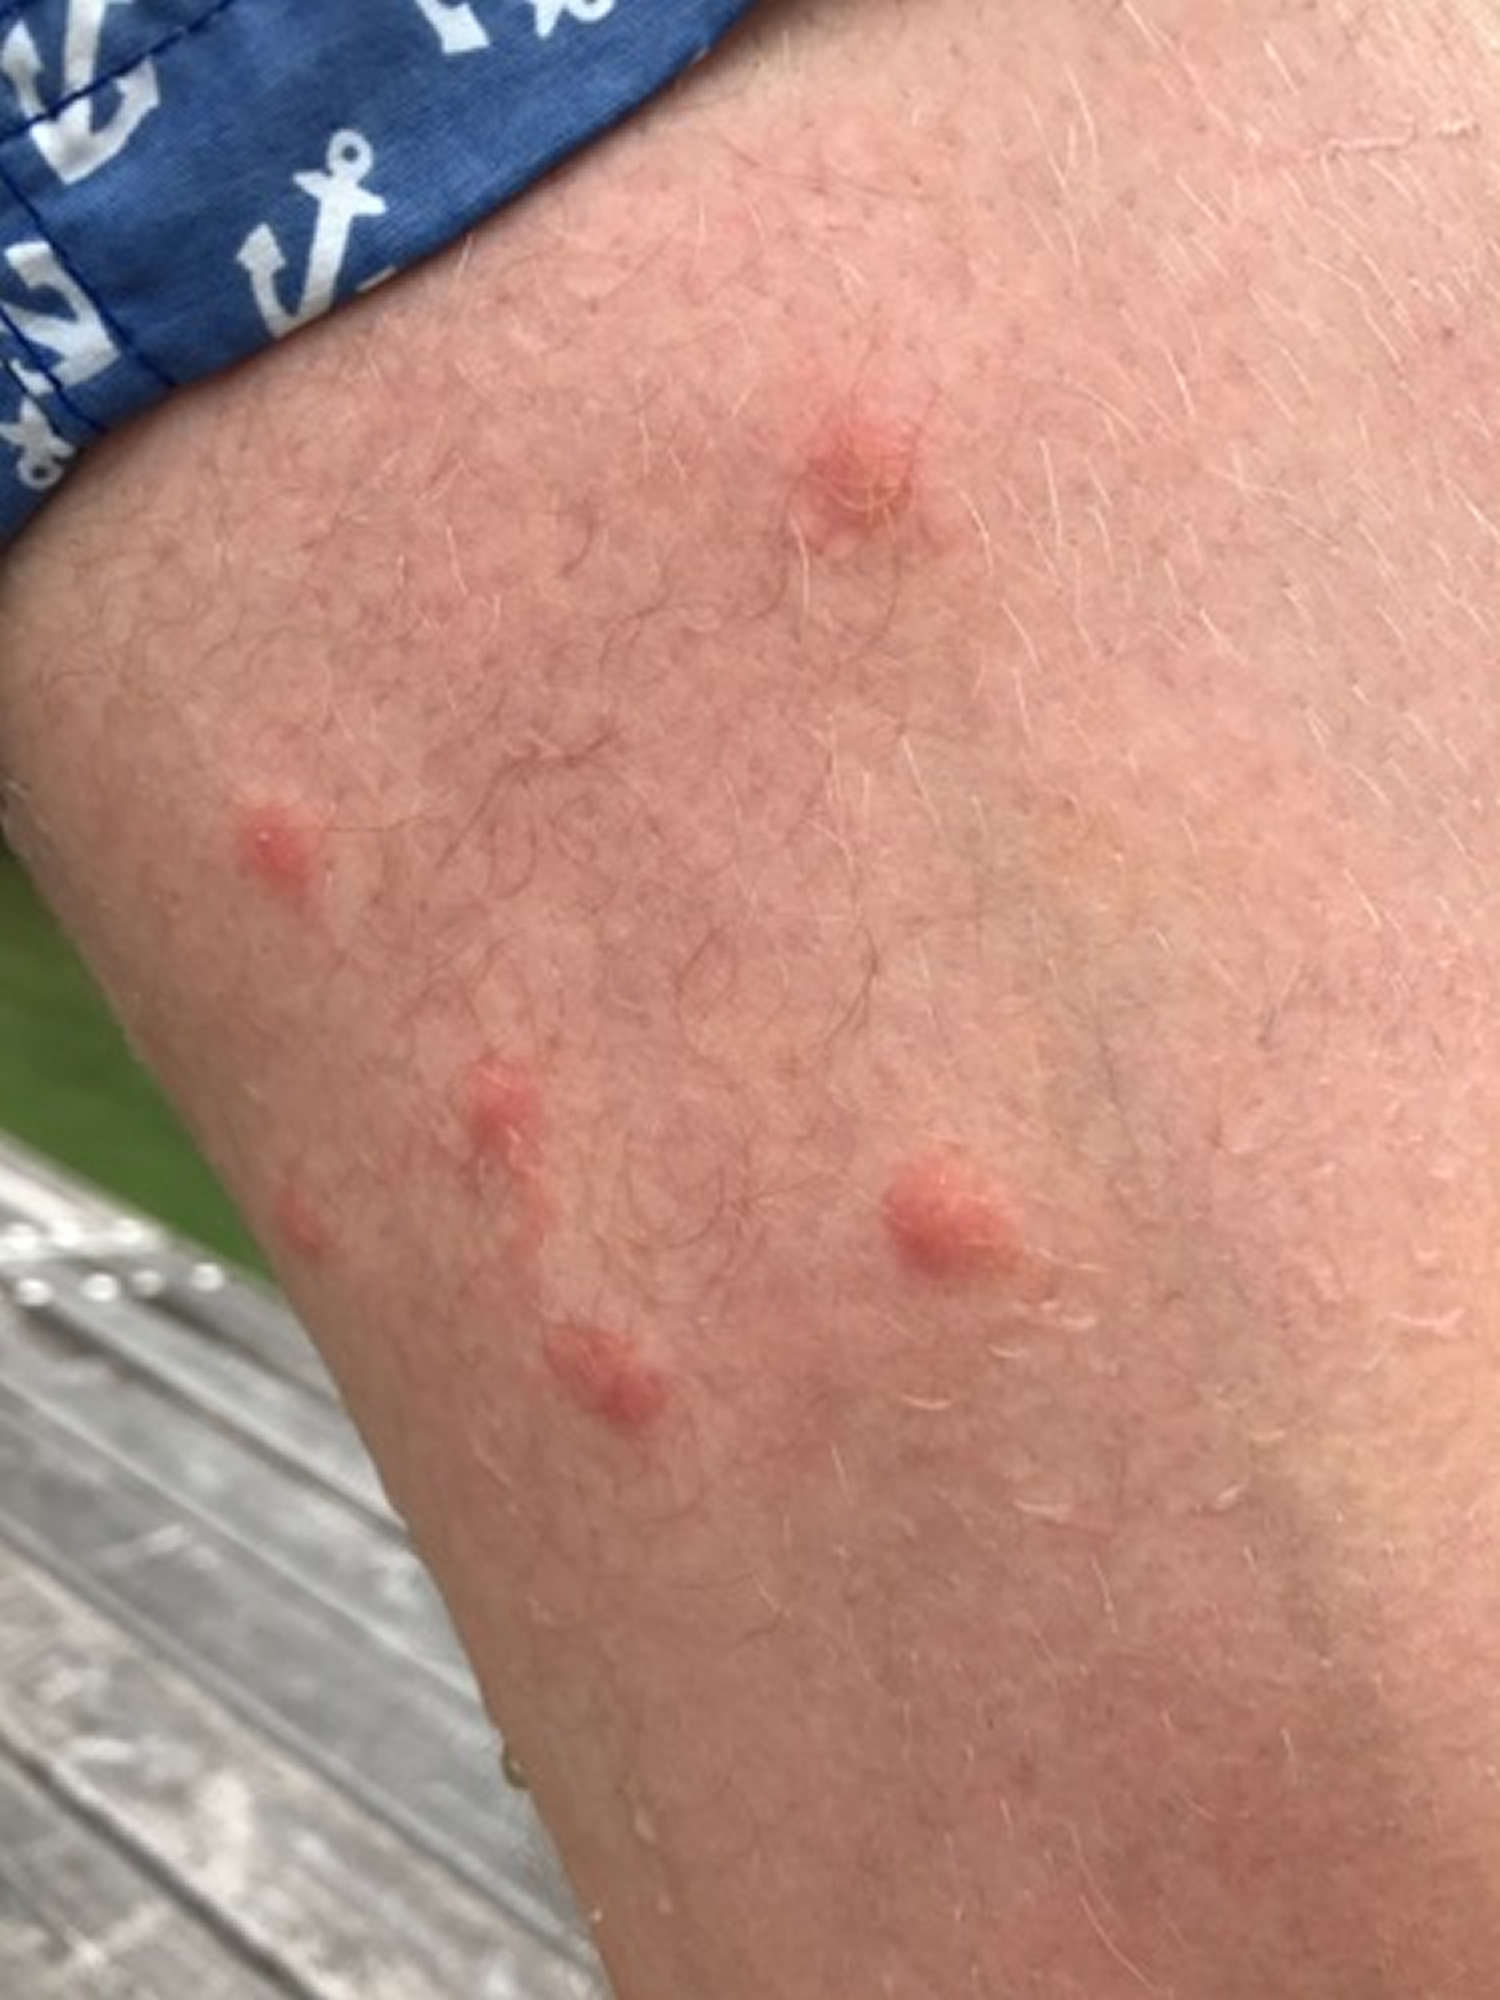 swimmers itch